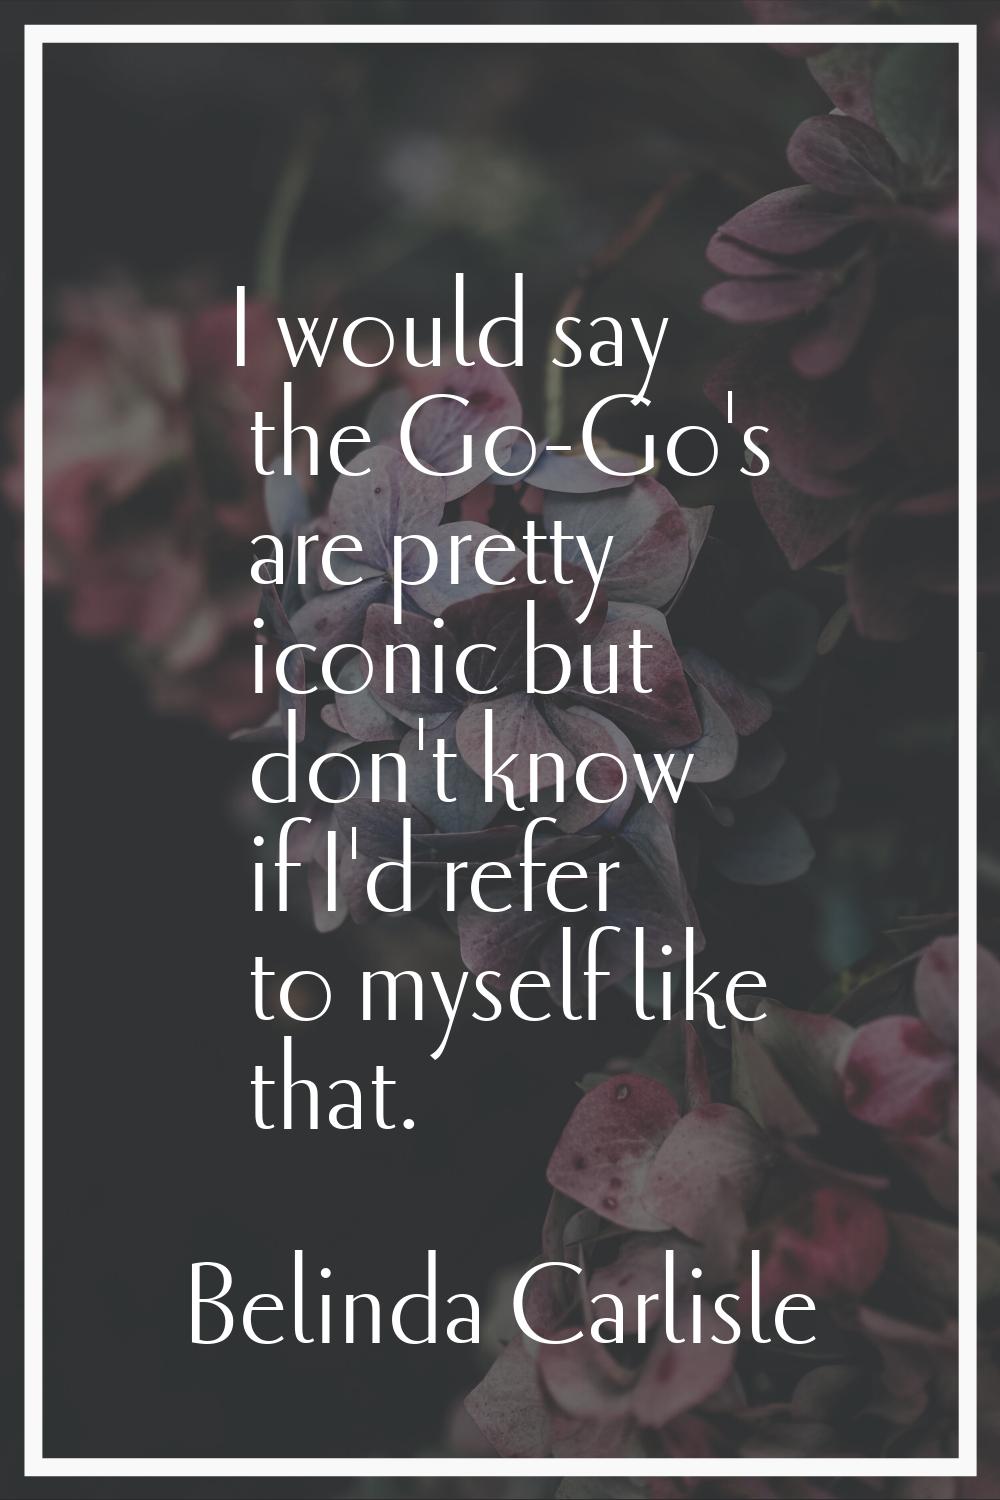 I would say the Go-Go's are pretty iconic but don't know if I'd refer to myself like that.